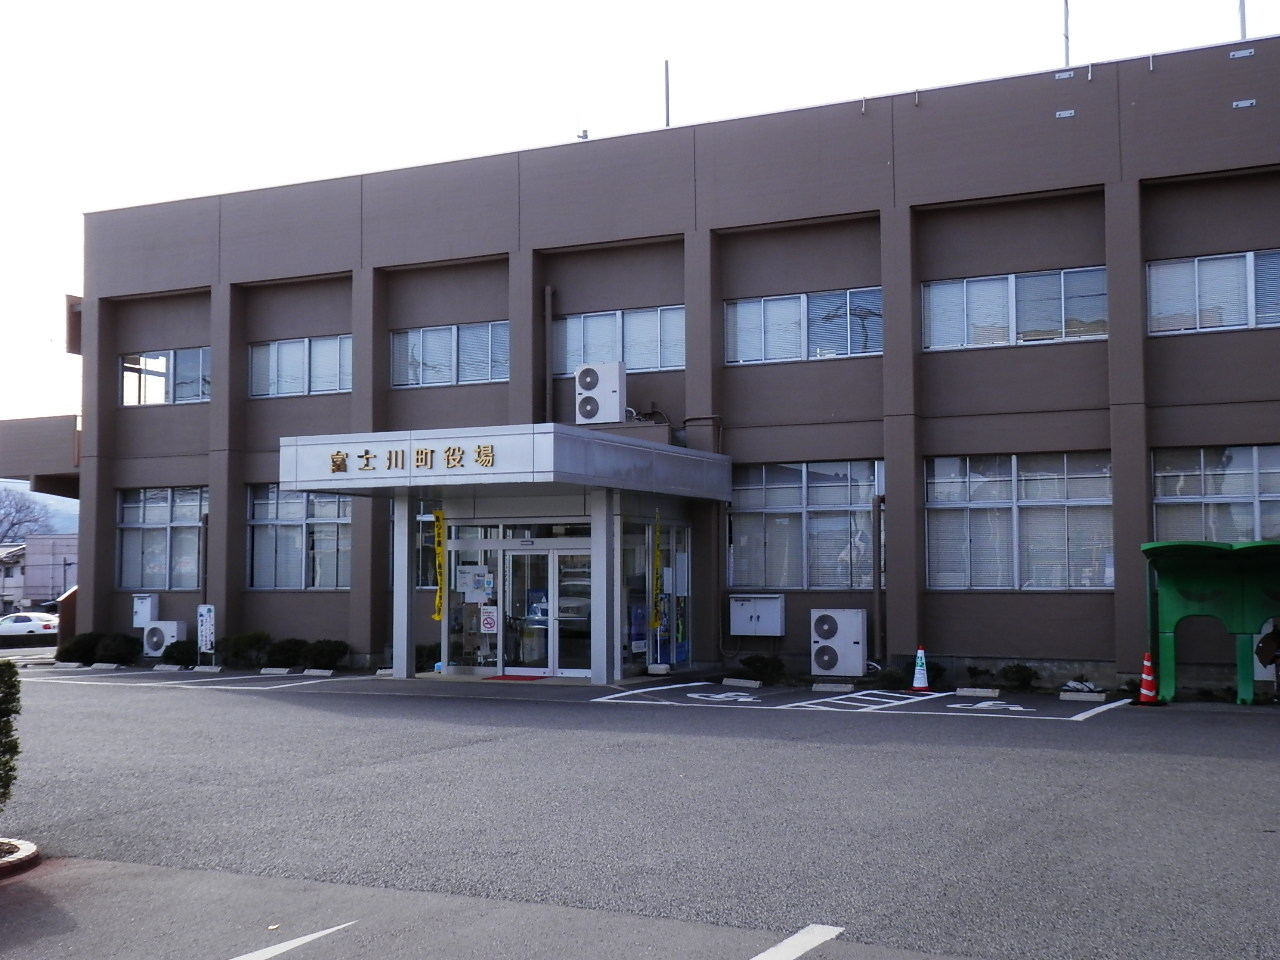 Government office. 821m until Fujikawa town office (government office)